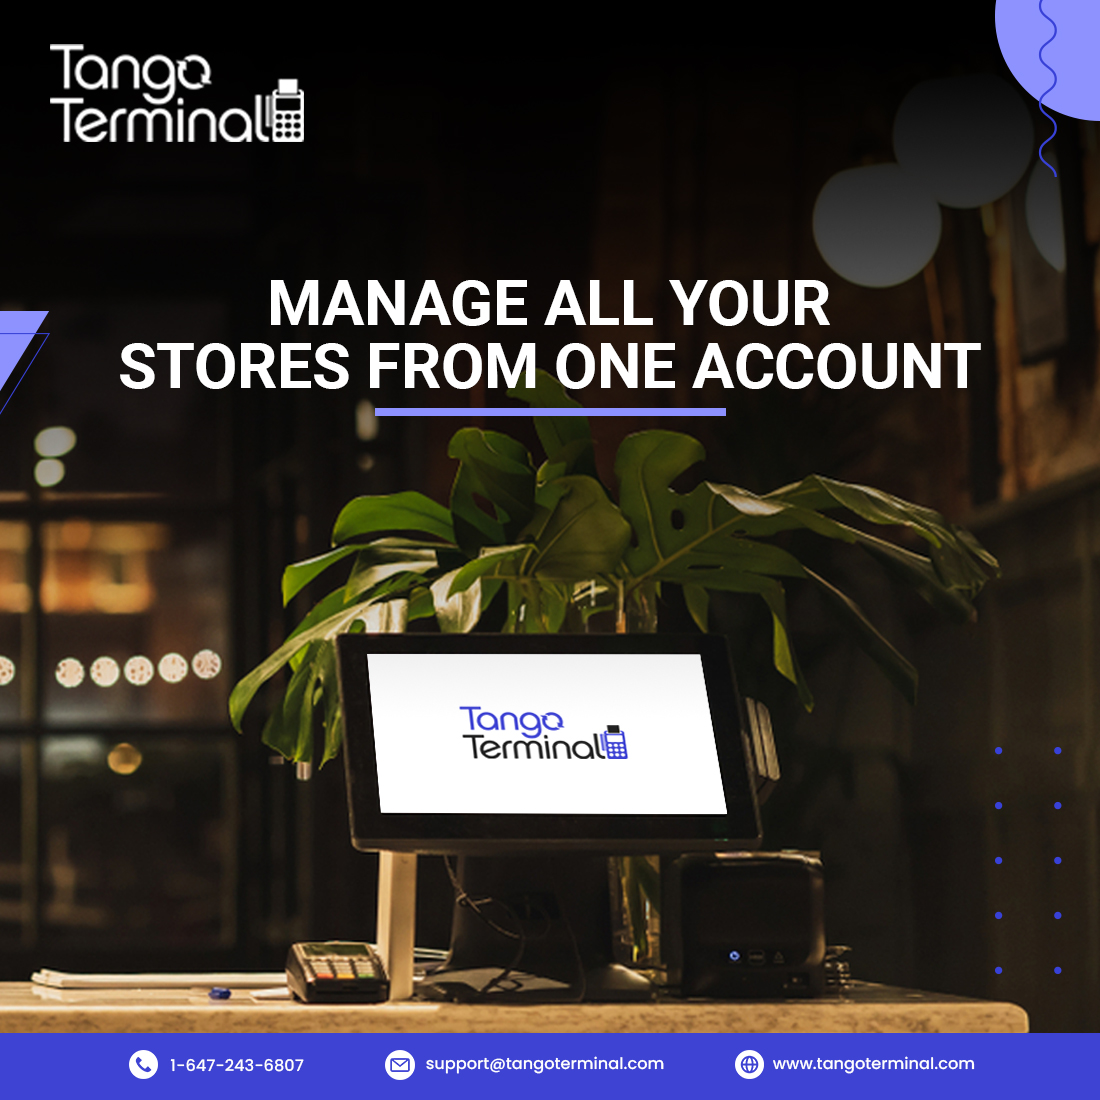 Managing stores is easy and efficient.

#TangoTerminal #storemanagement #pos #possoftware